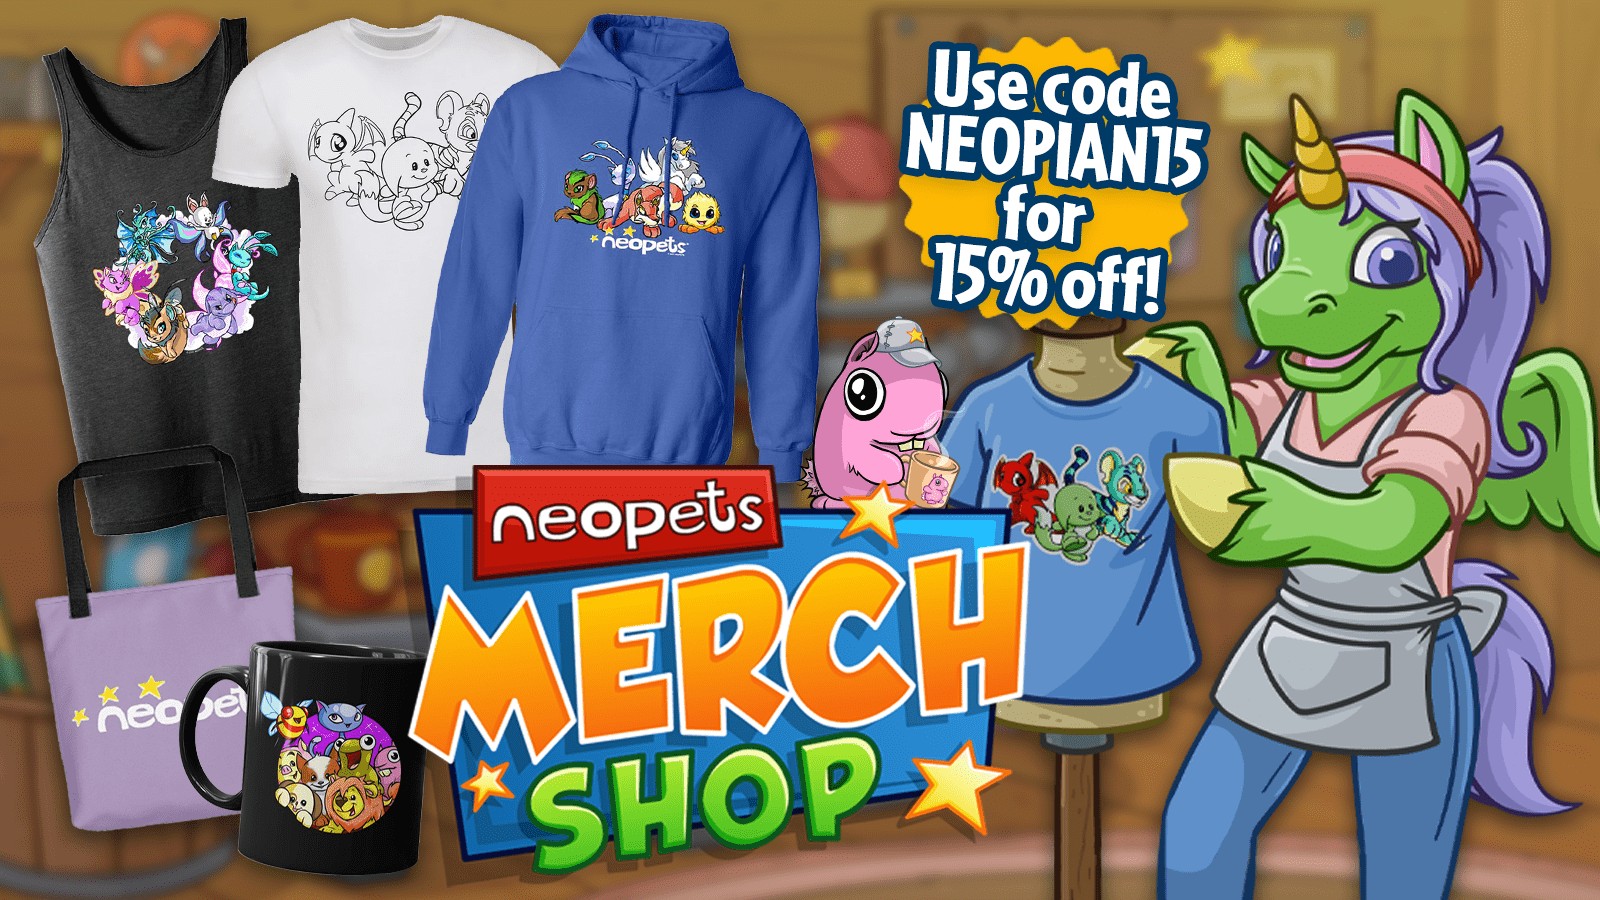 https://images.neopets.com/homepage/marquee/merchpromo_mainnotice.png